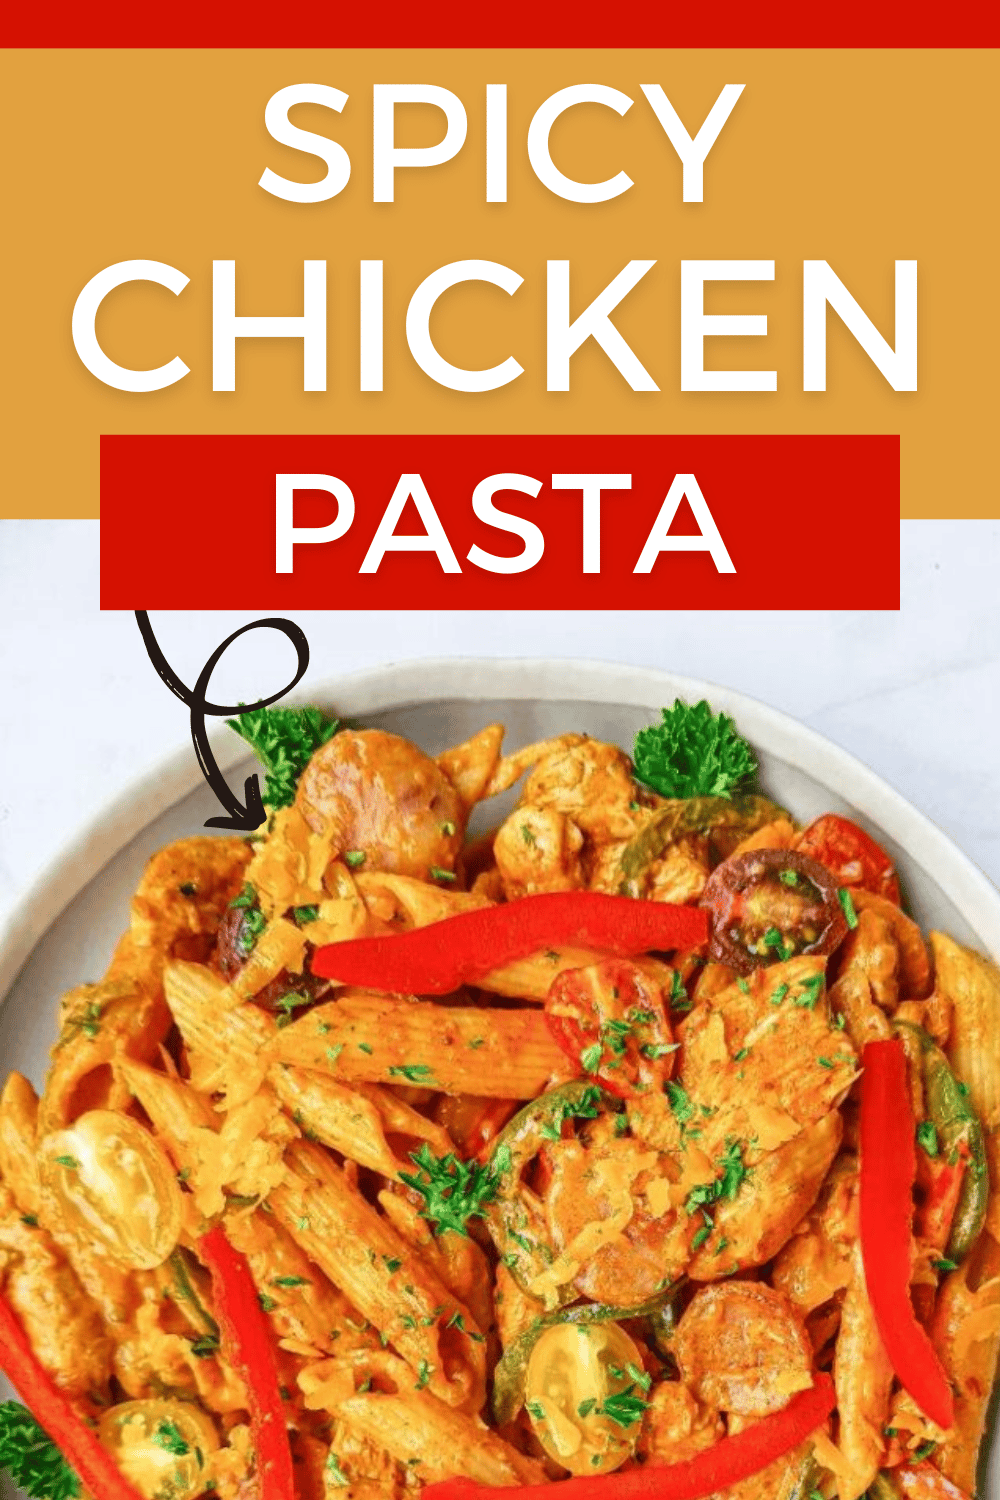 This Spicy Chicken Pasta is a flavorful, one-pan meal you can whip up in under half an hour. Perfect for busy weeknights! #cajun #chicken #pasta #onepotmeal #spicychickenpasta via @wondermomwannab